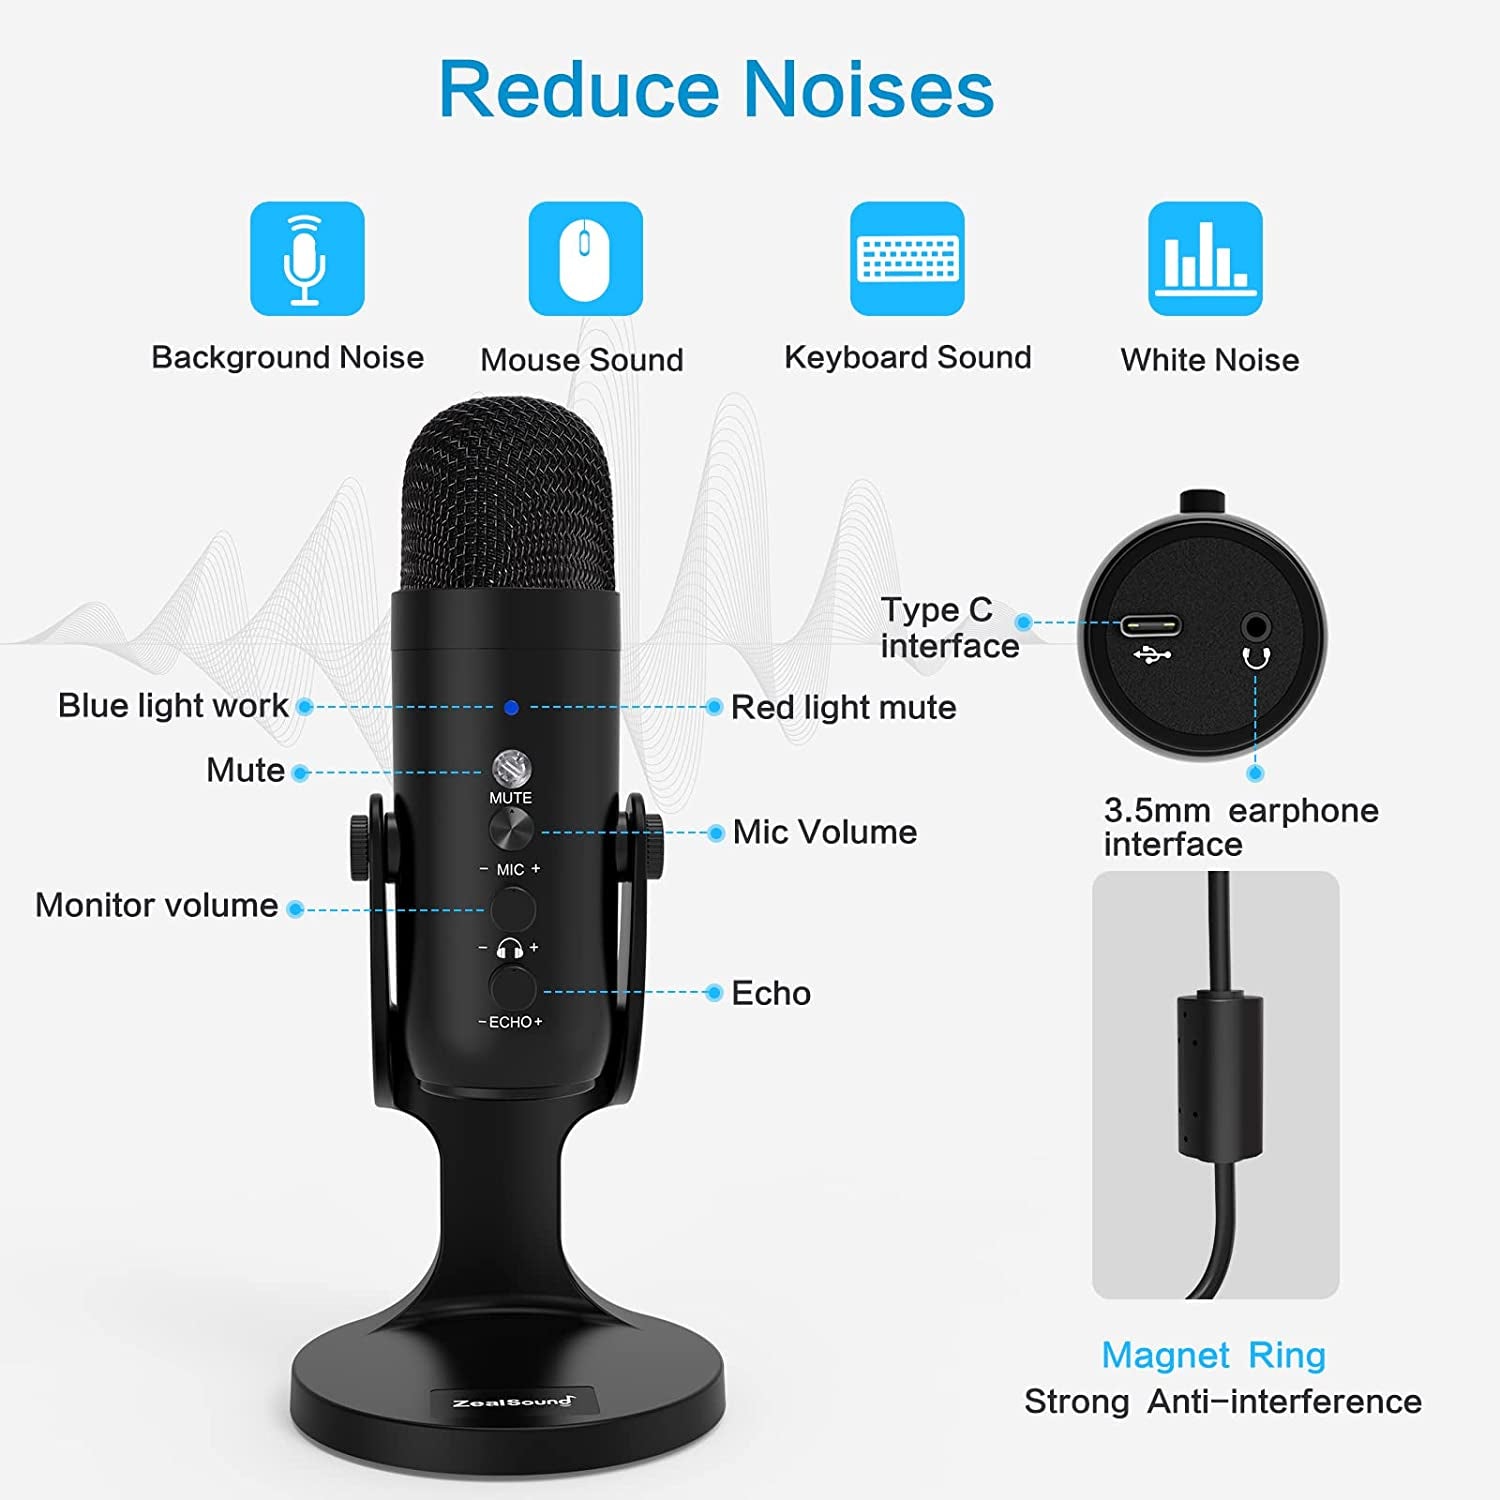 Professional USB Condenser Microphone with Plug and Play Functionality for Gaming, Podcasting, and Recording on PC, Mac, and PS4/PS5 (Black)